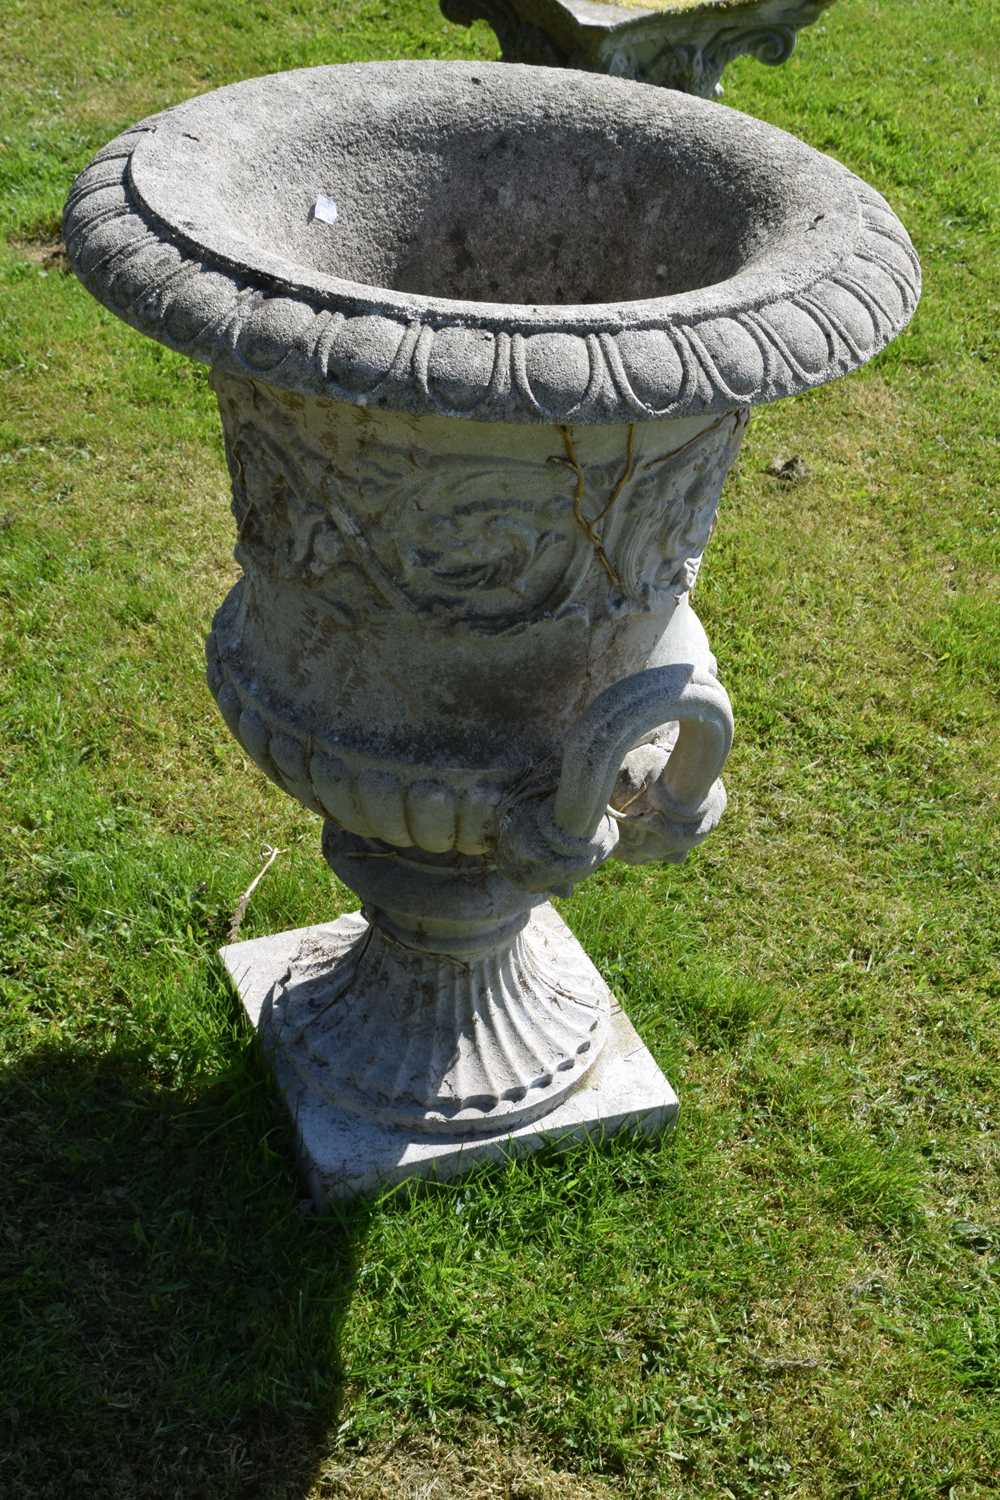 Composition stone garden urn and pedestal - Image 9 of 11